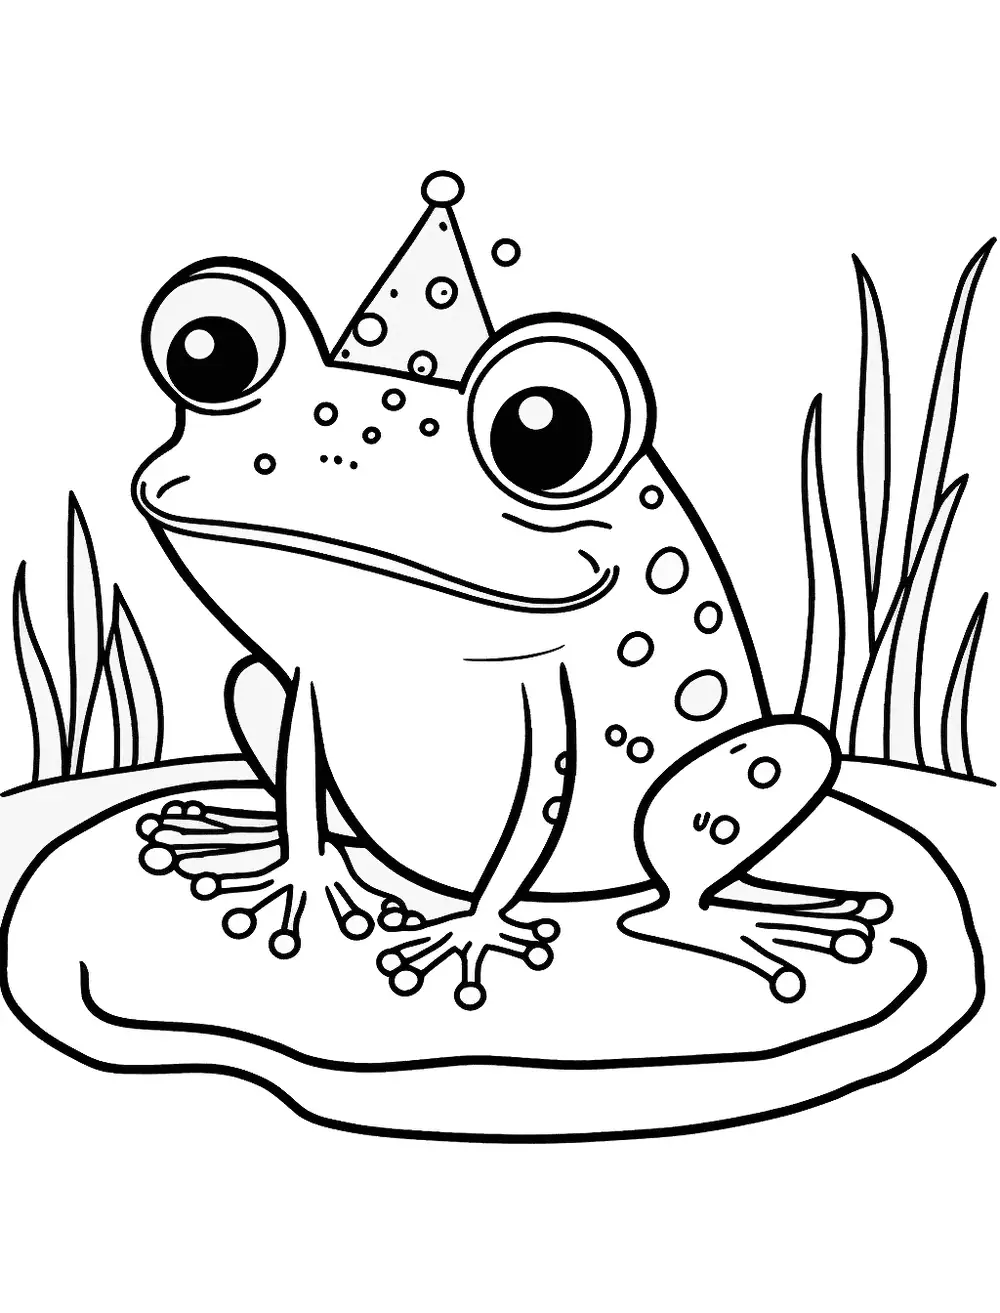 Birthday Frog Coloring Page - A frog celebrating his birthday with a cake and a birthday hat